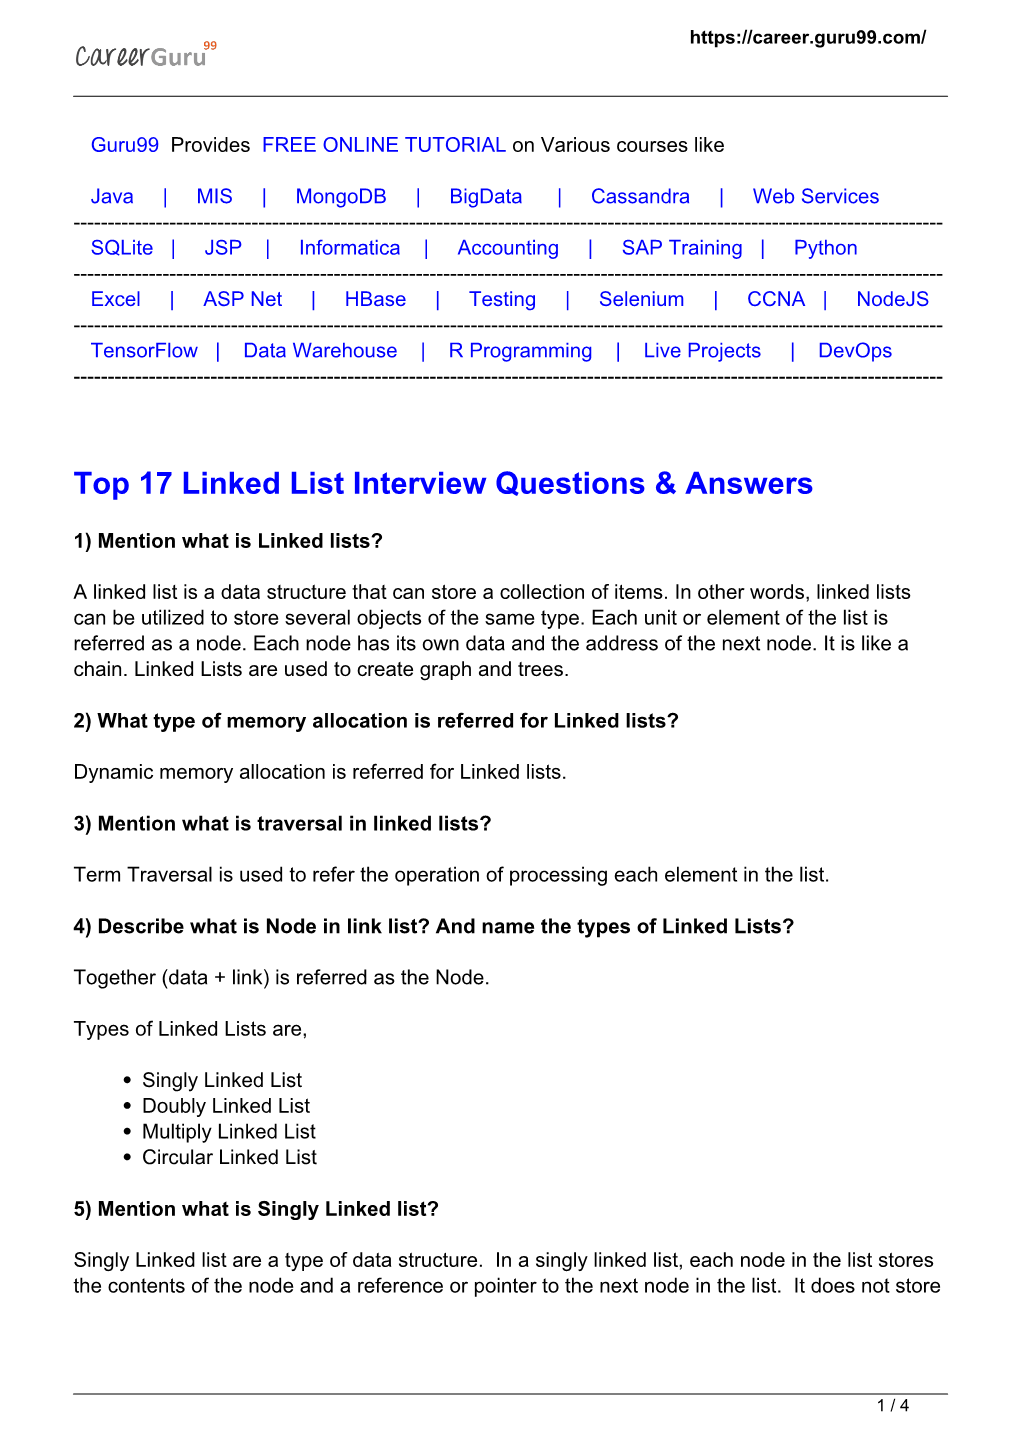 Top 17 Linked List Interview Questions & Answers